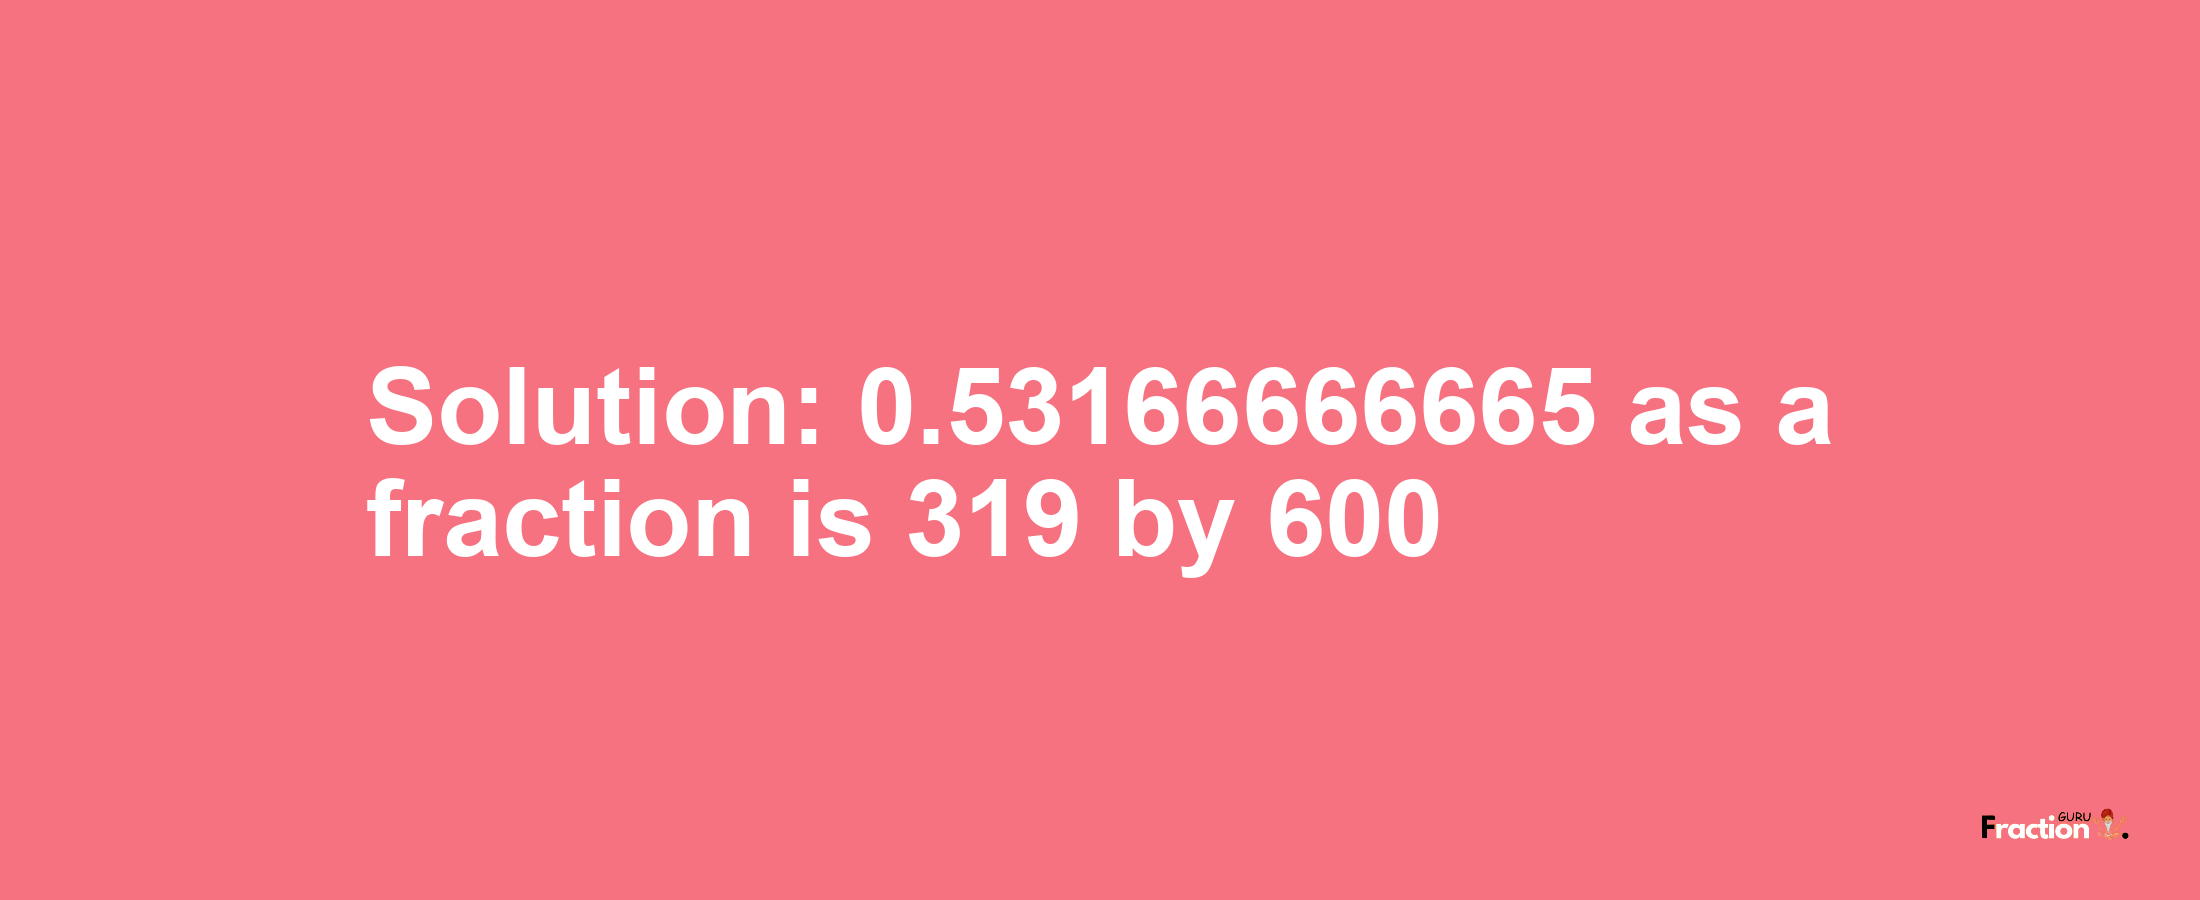 Solution:0.53166666665 as a fraction is 319/600